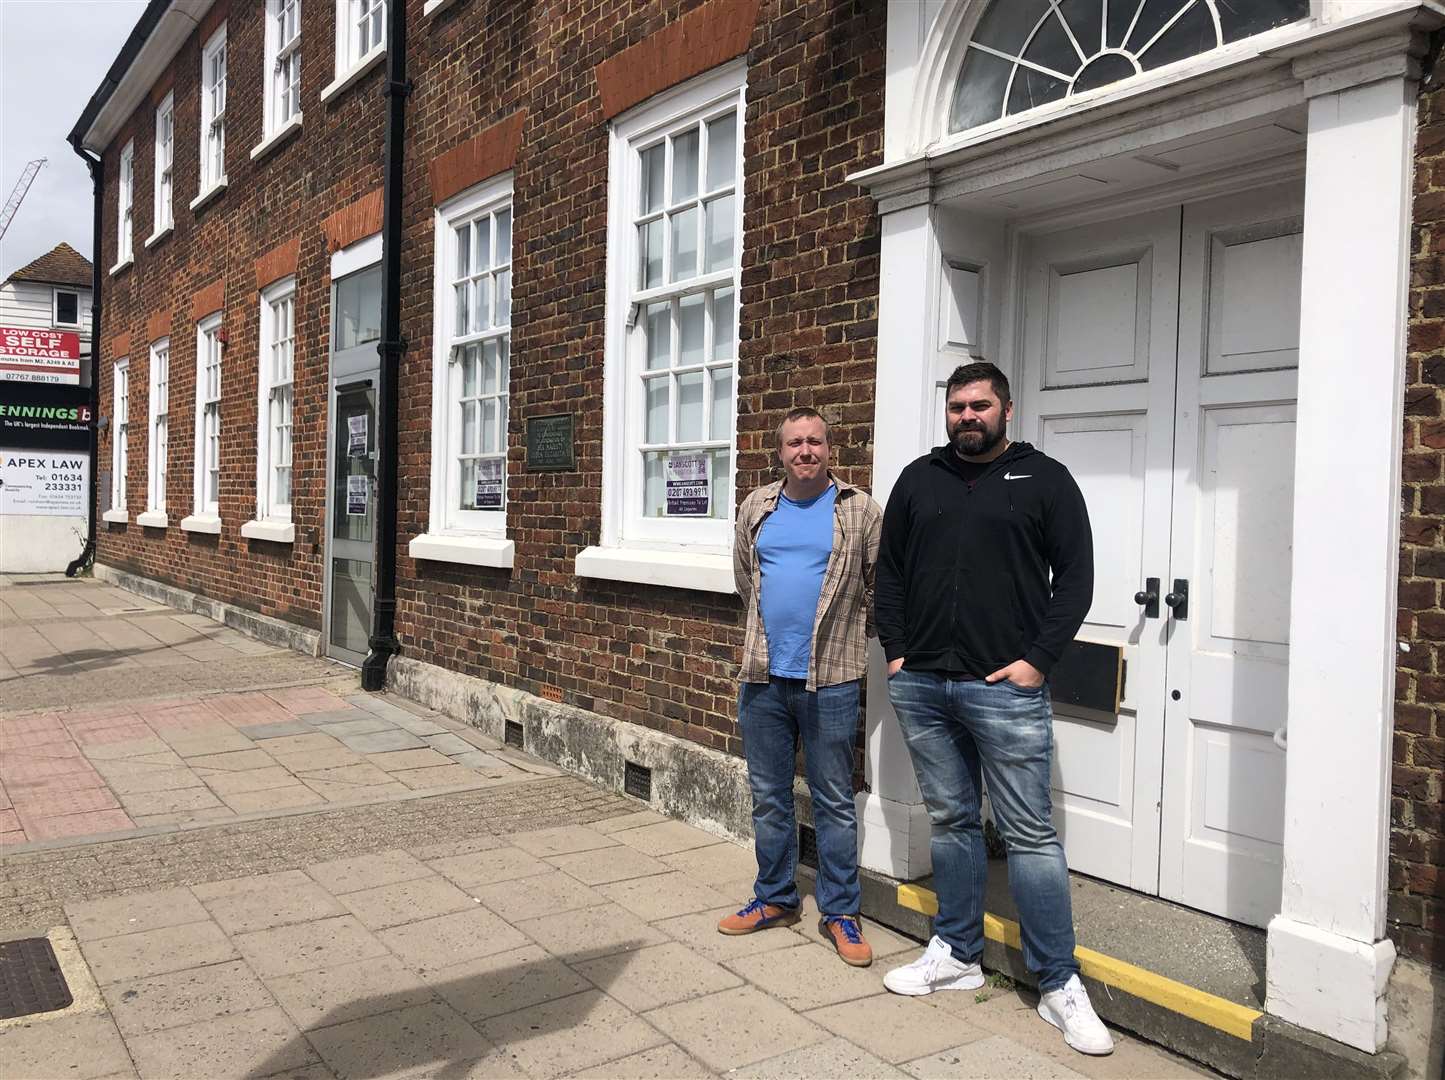 Tom Mudge and Jamie Clark, owners of the Dead Pigeon in Rochester, are opening The Greedy Banker in Rainham